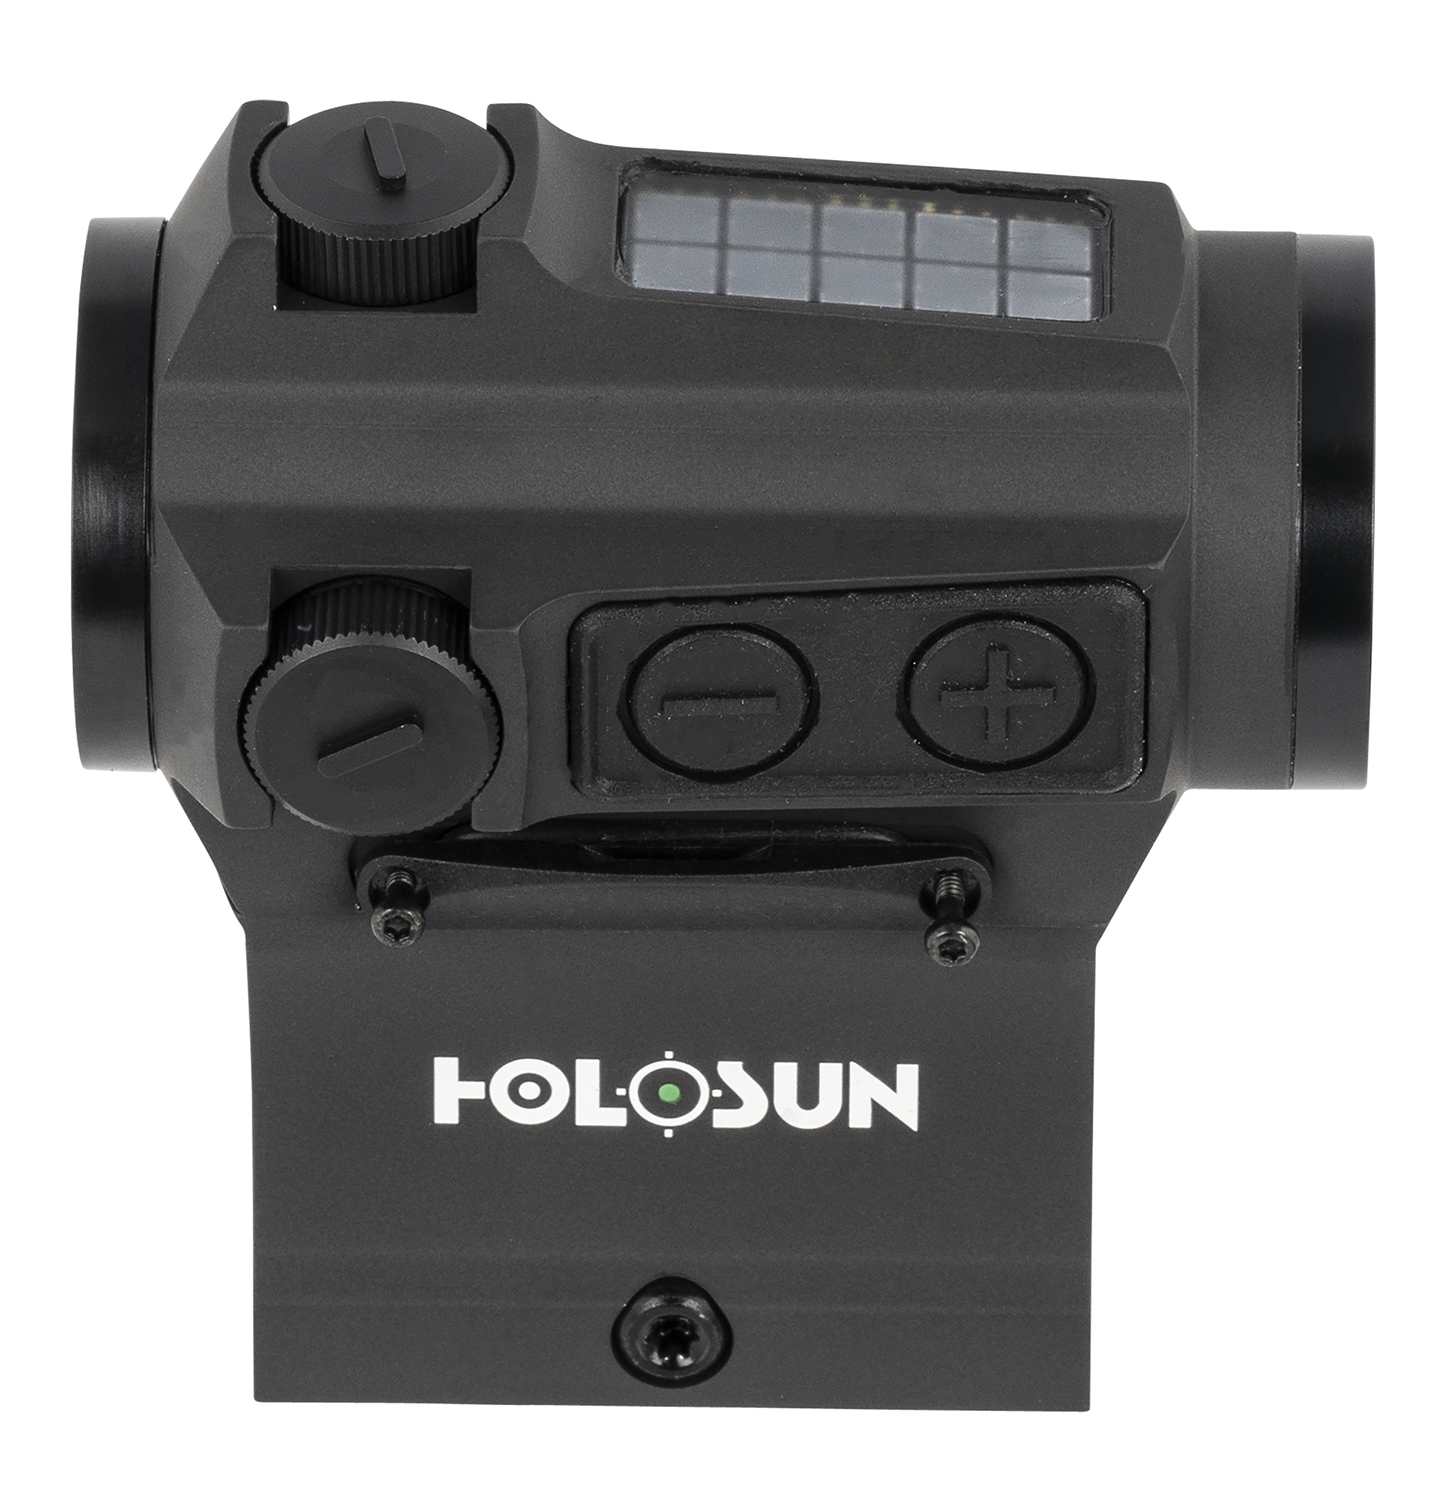 Holosun HE503CUGR HS503CU  Black Anodized 1x 20mm 2/65 MOA Green Dot & Circle Reticle Includes Battery/Cover/Lens Cloth/Mounts/T10 L Key